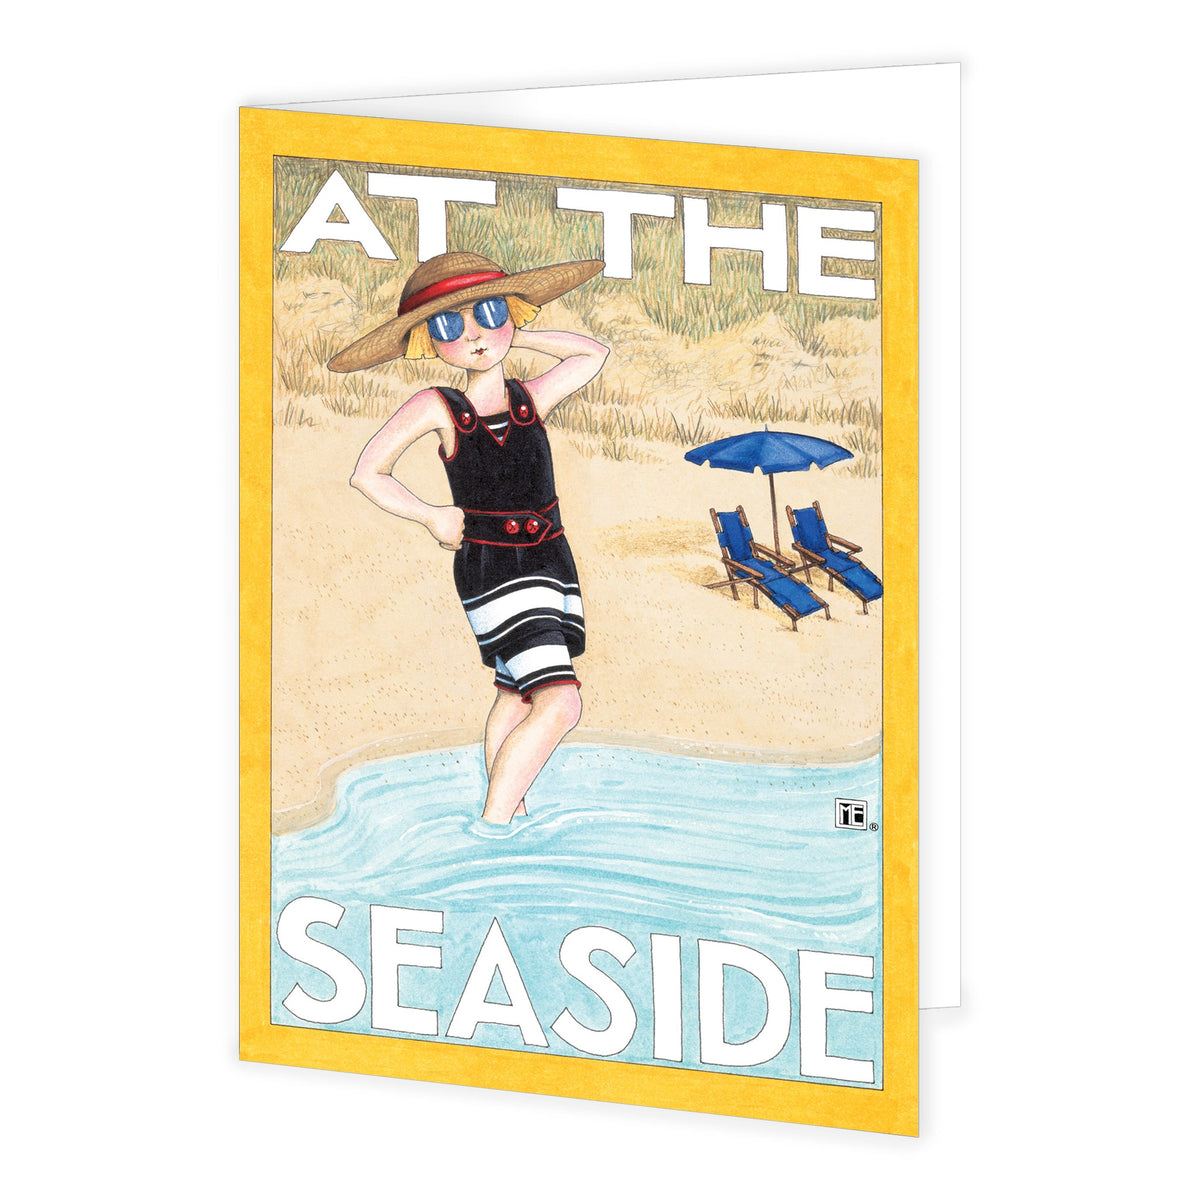 At the Seaside Greeting Cards